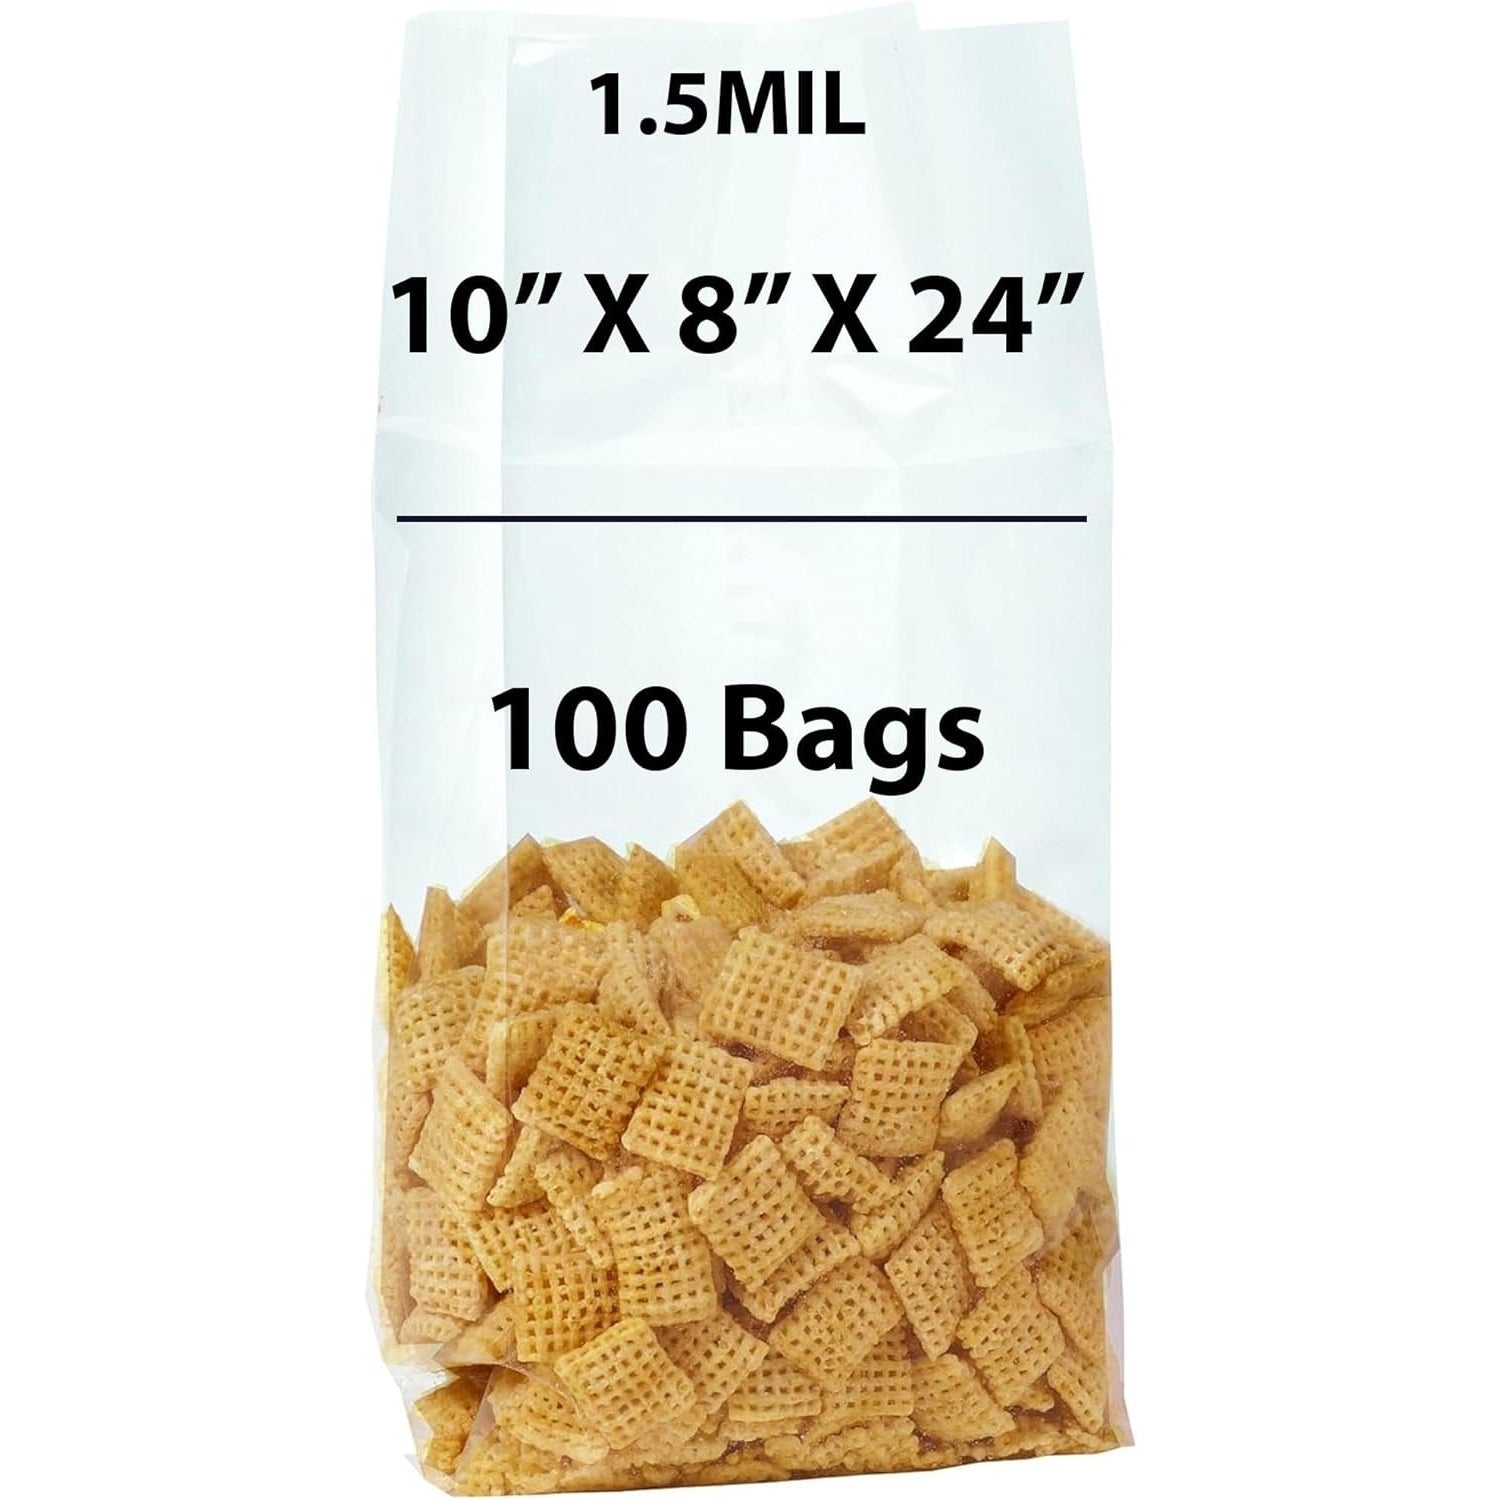 Gusseted Polypropylene Bags 1.5 Mil 10 inch X 8 inch X 24 inch Size pack of 100